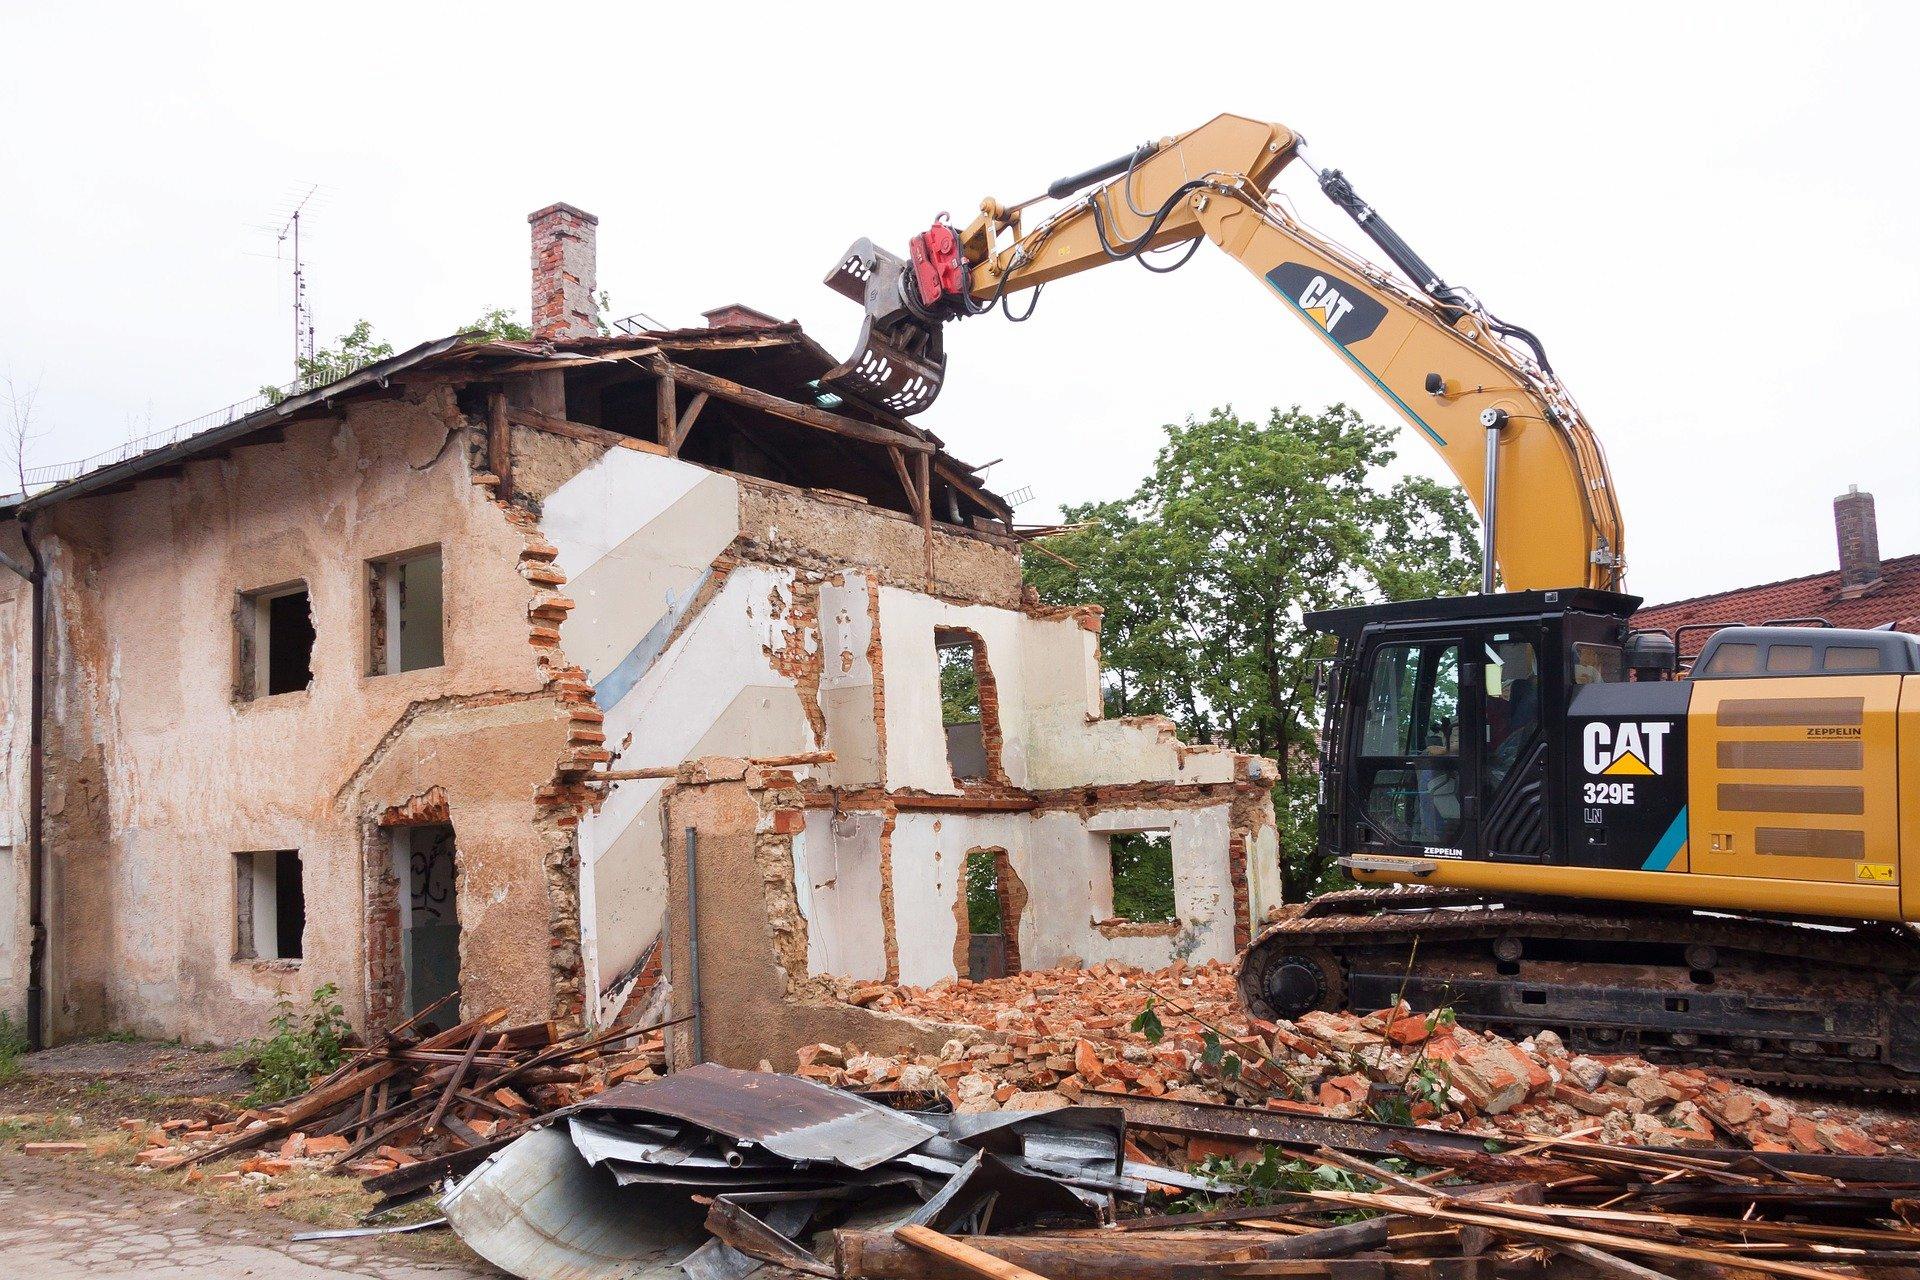 What Are Demolition Services? What Process Do They Follow?